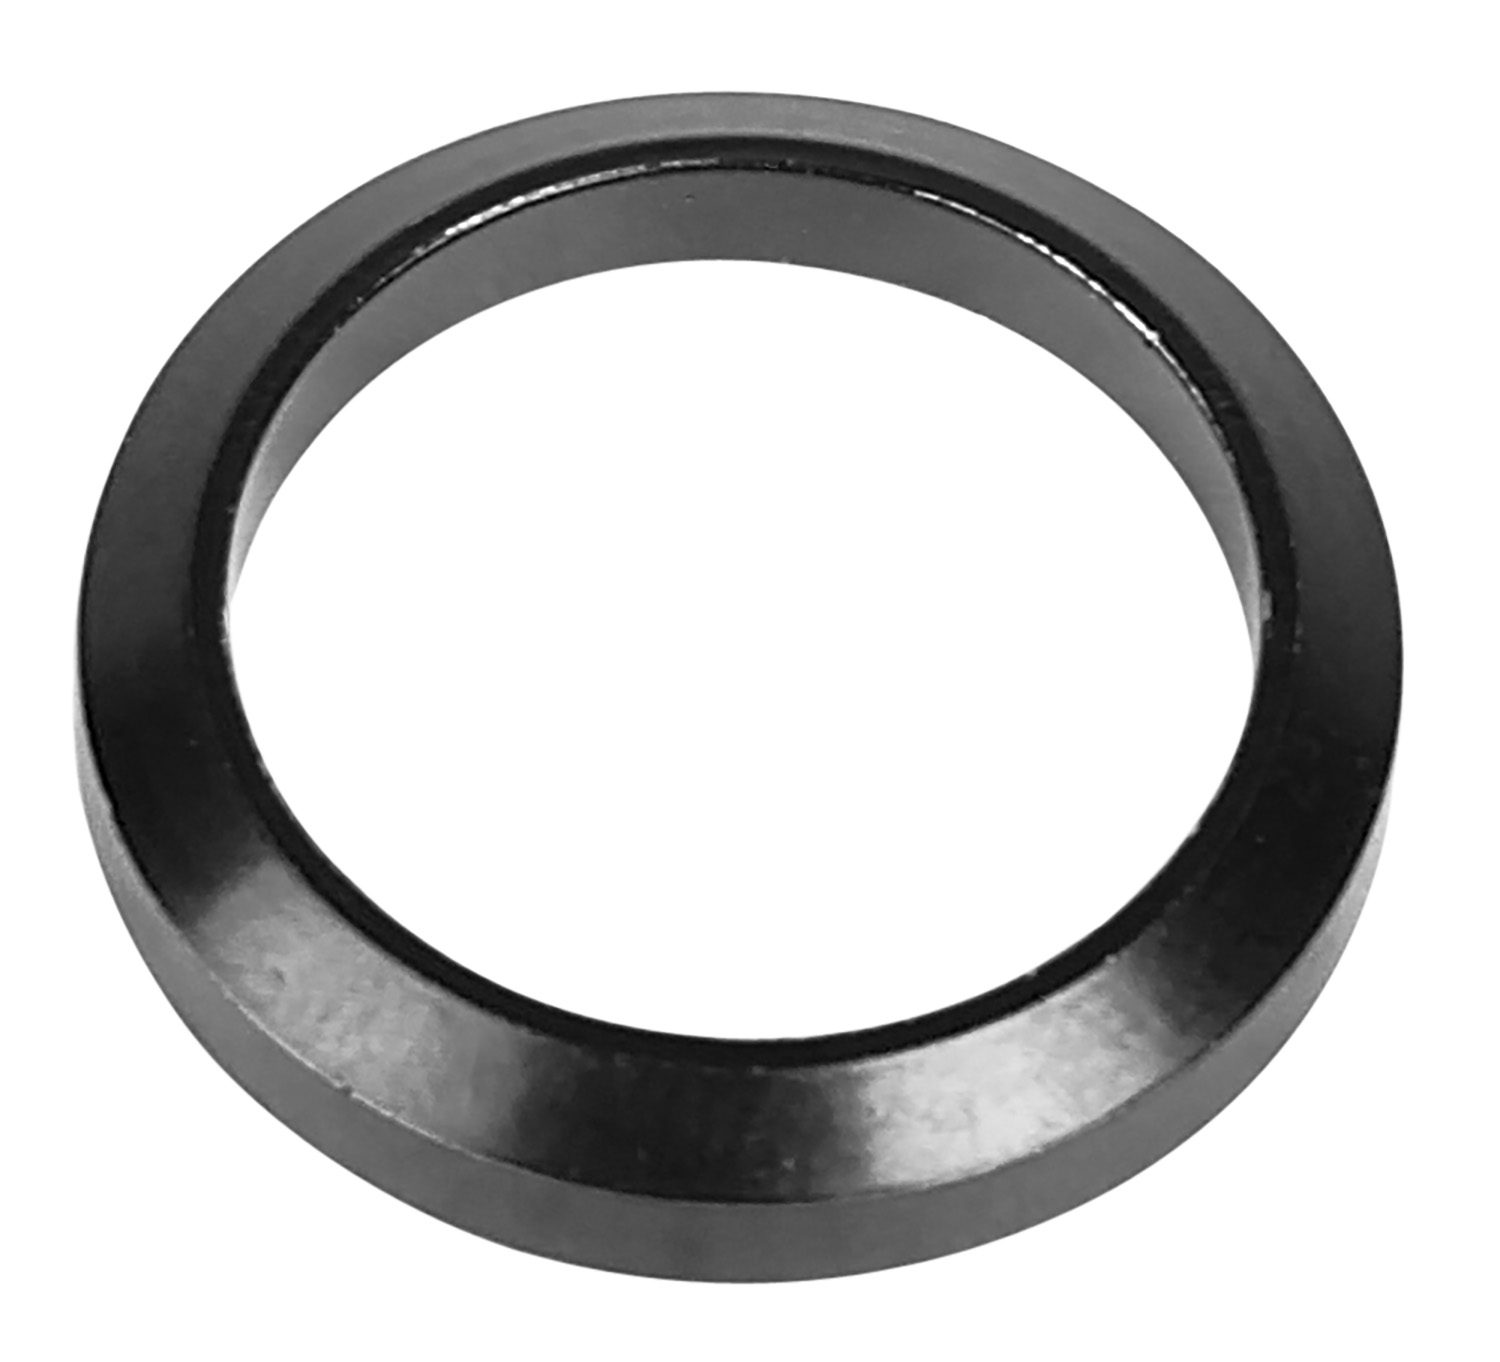 LBE Unlimited ARCW-.308 Crush Washer  17-4 Stainless Steel Black 308 AR-10